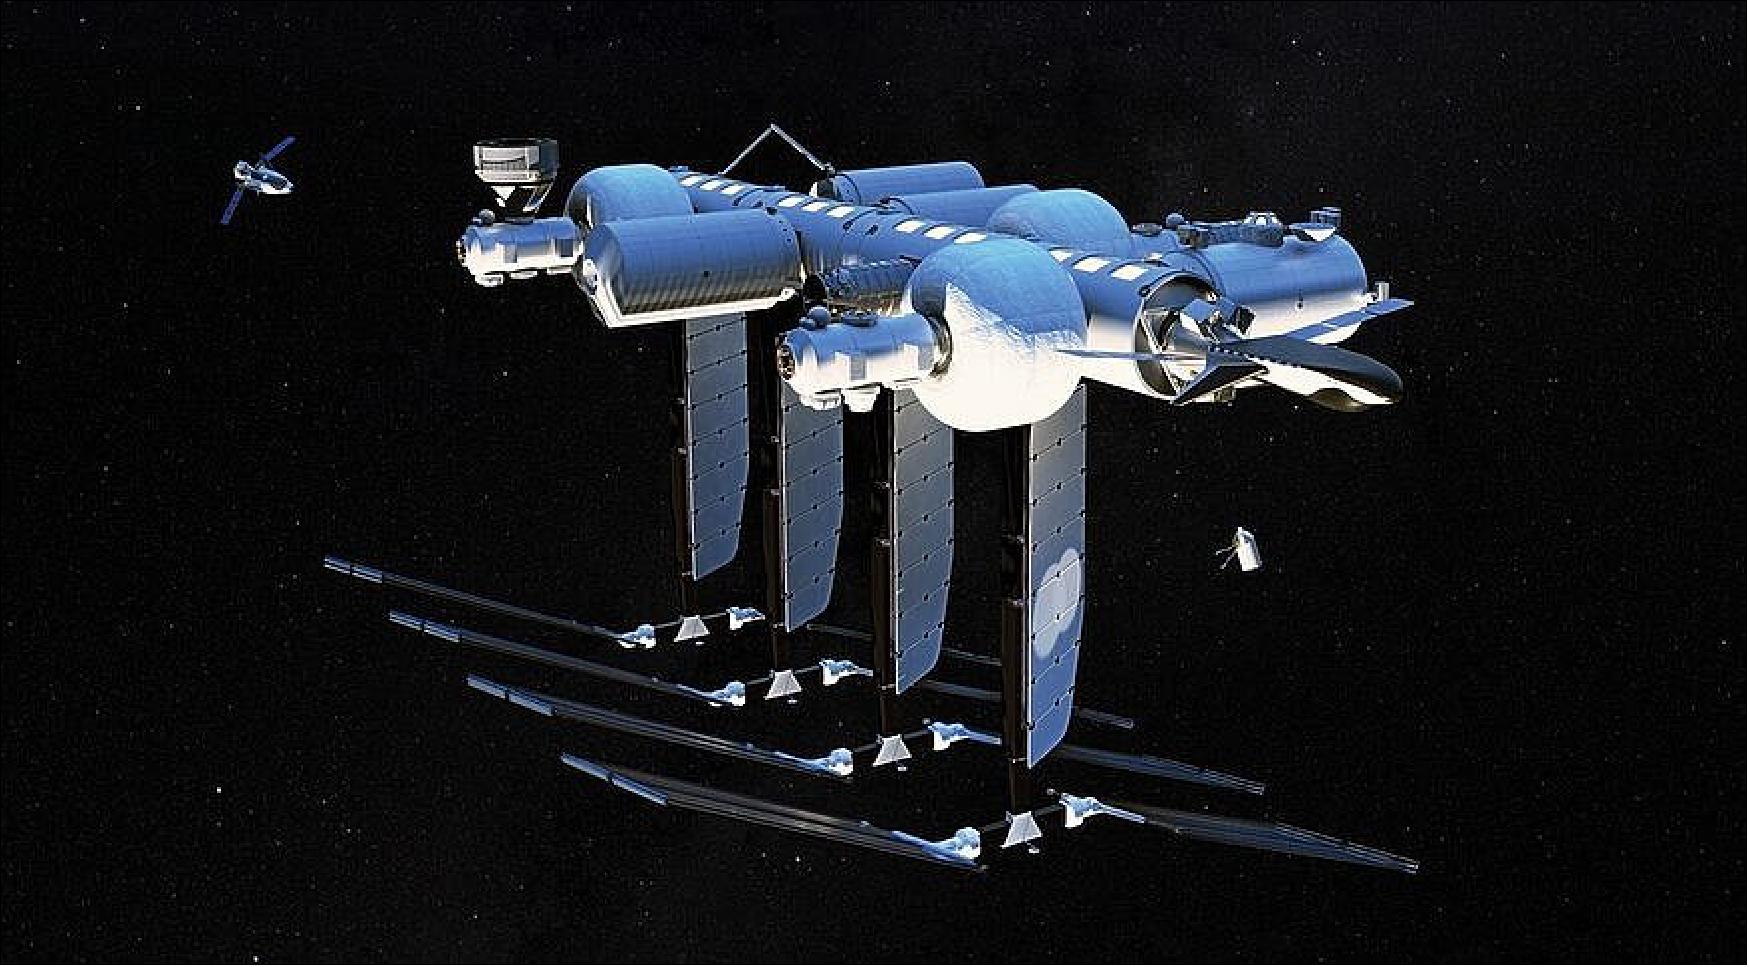 Figure 48: The proposed Orbital Reef station can be expanded over time by adding more modules, but initially will be about one-third the size depicted here (image credit: Blue Origin)